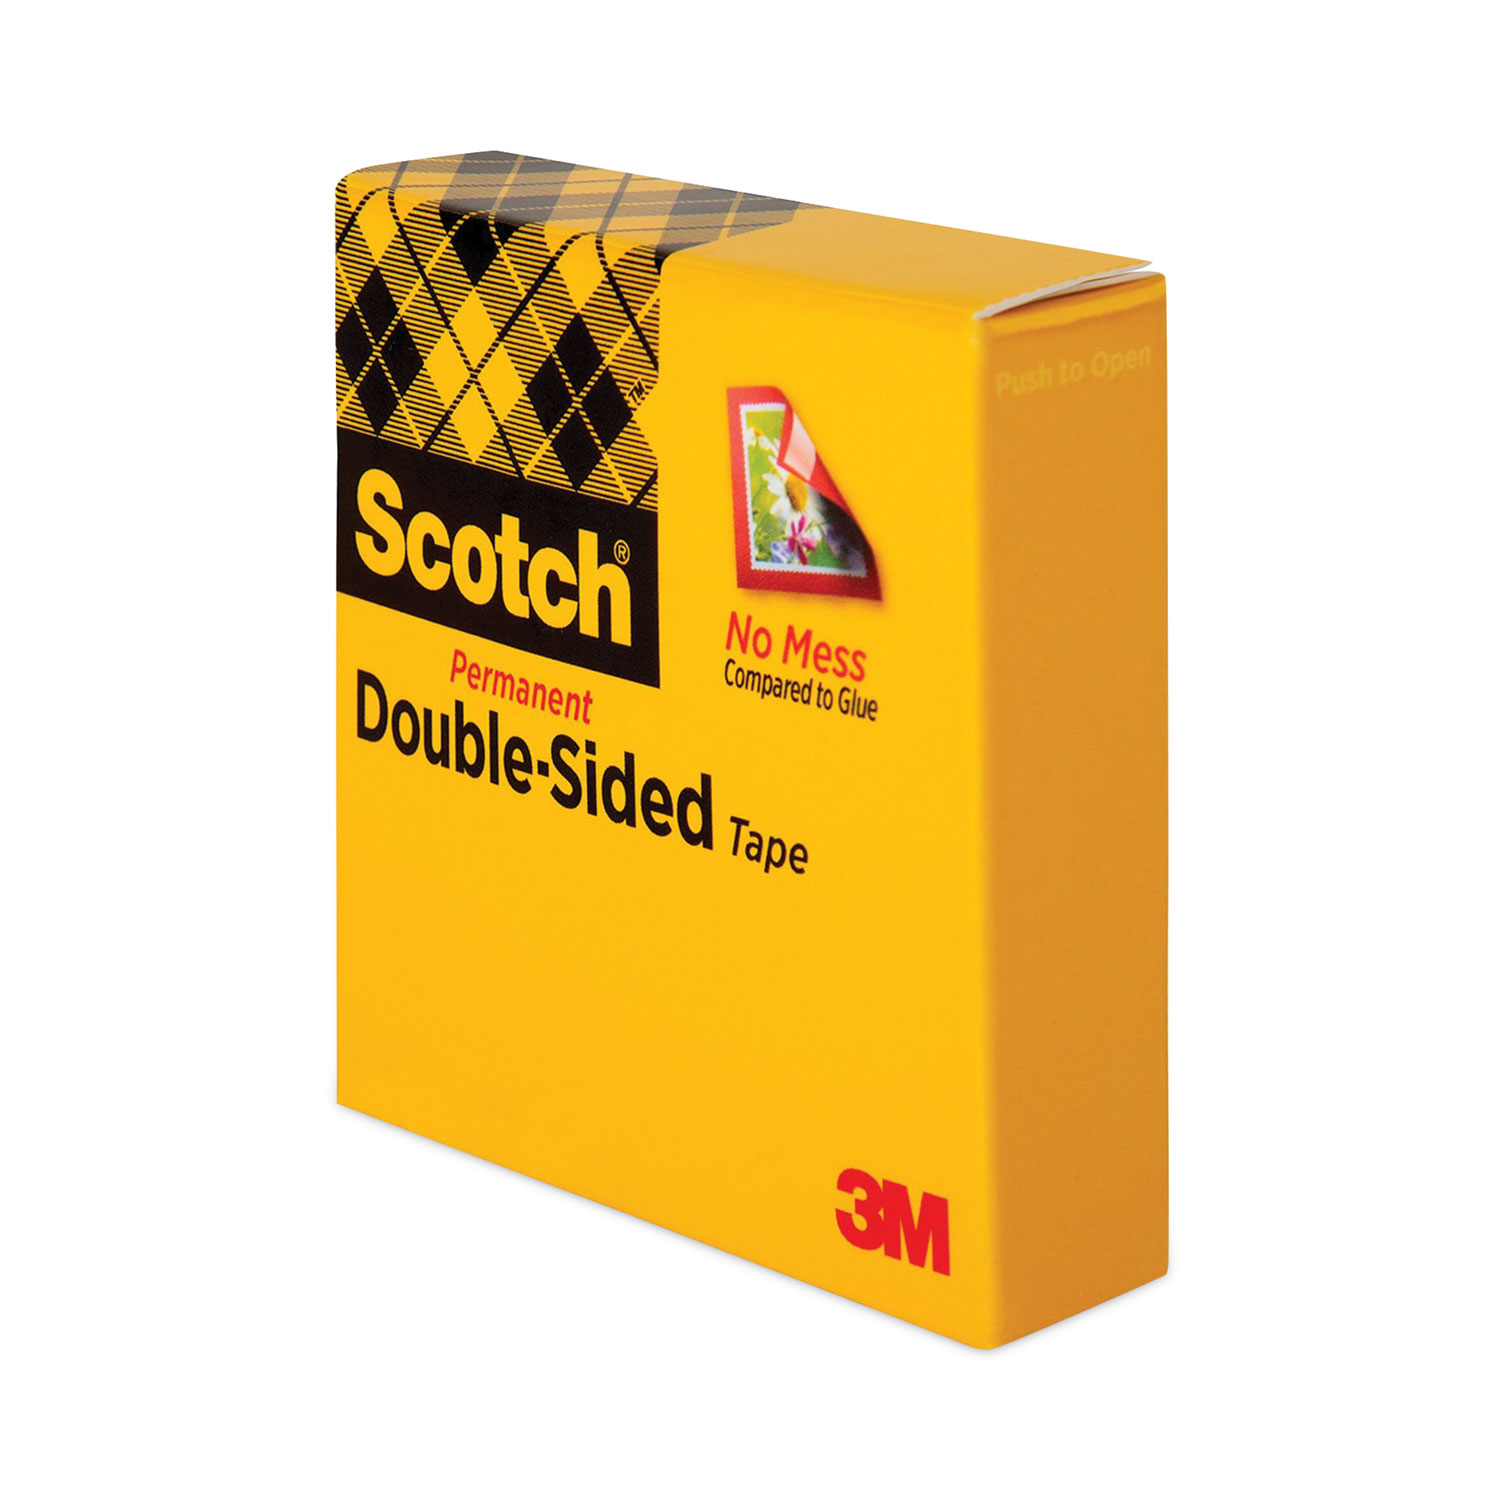 Buy Scotch FT-5100-4927-1 136R2 Double sided adhesive tape Scotch